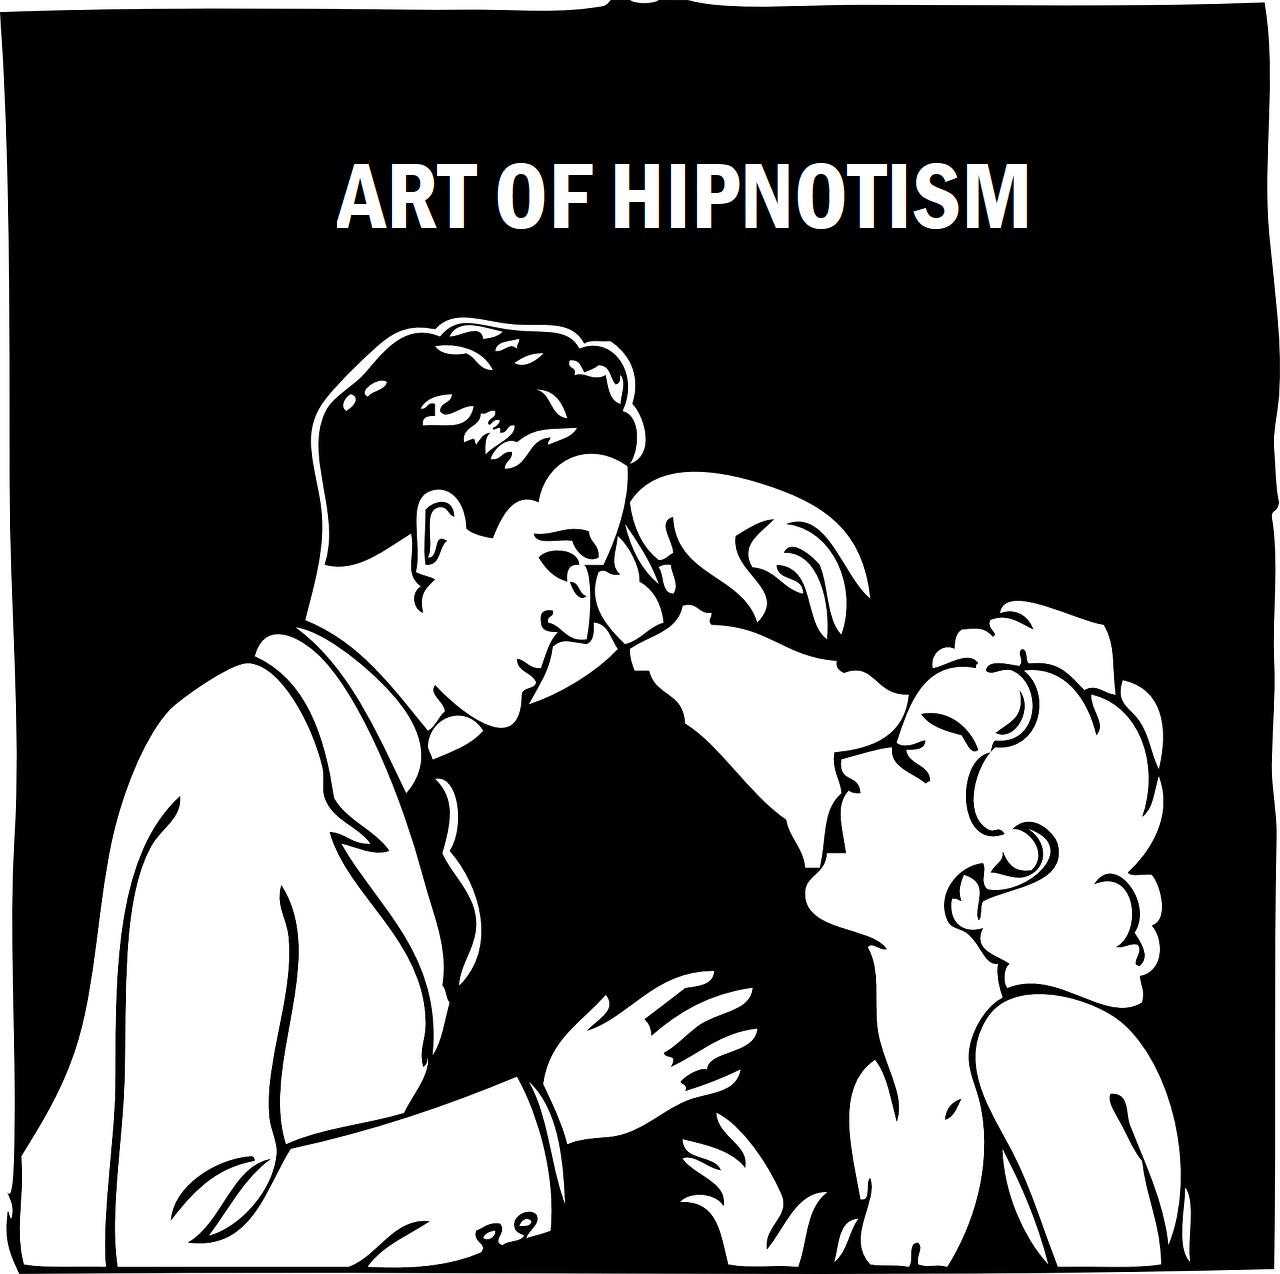 Hypnotism: The Art of Hijacking the Mind